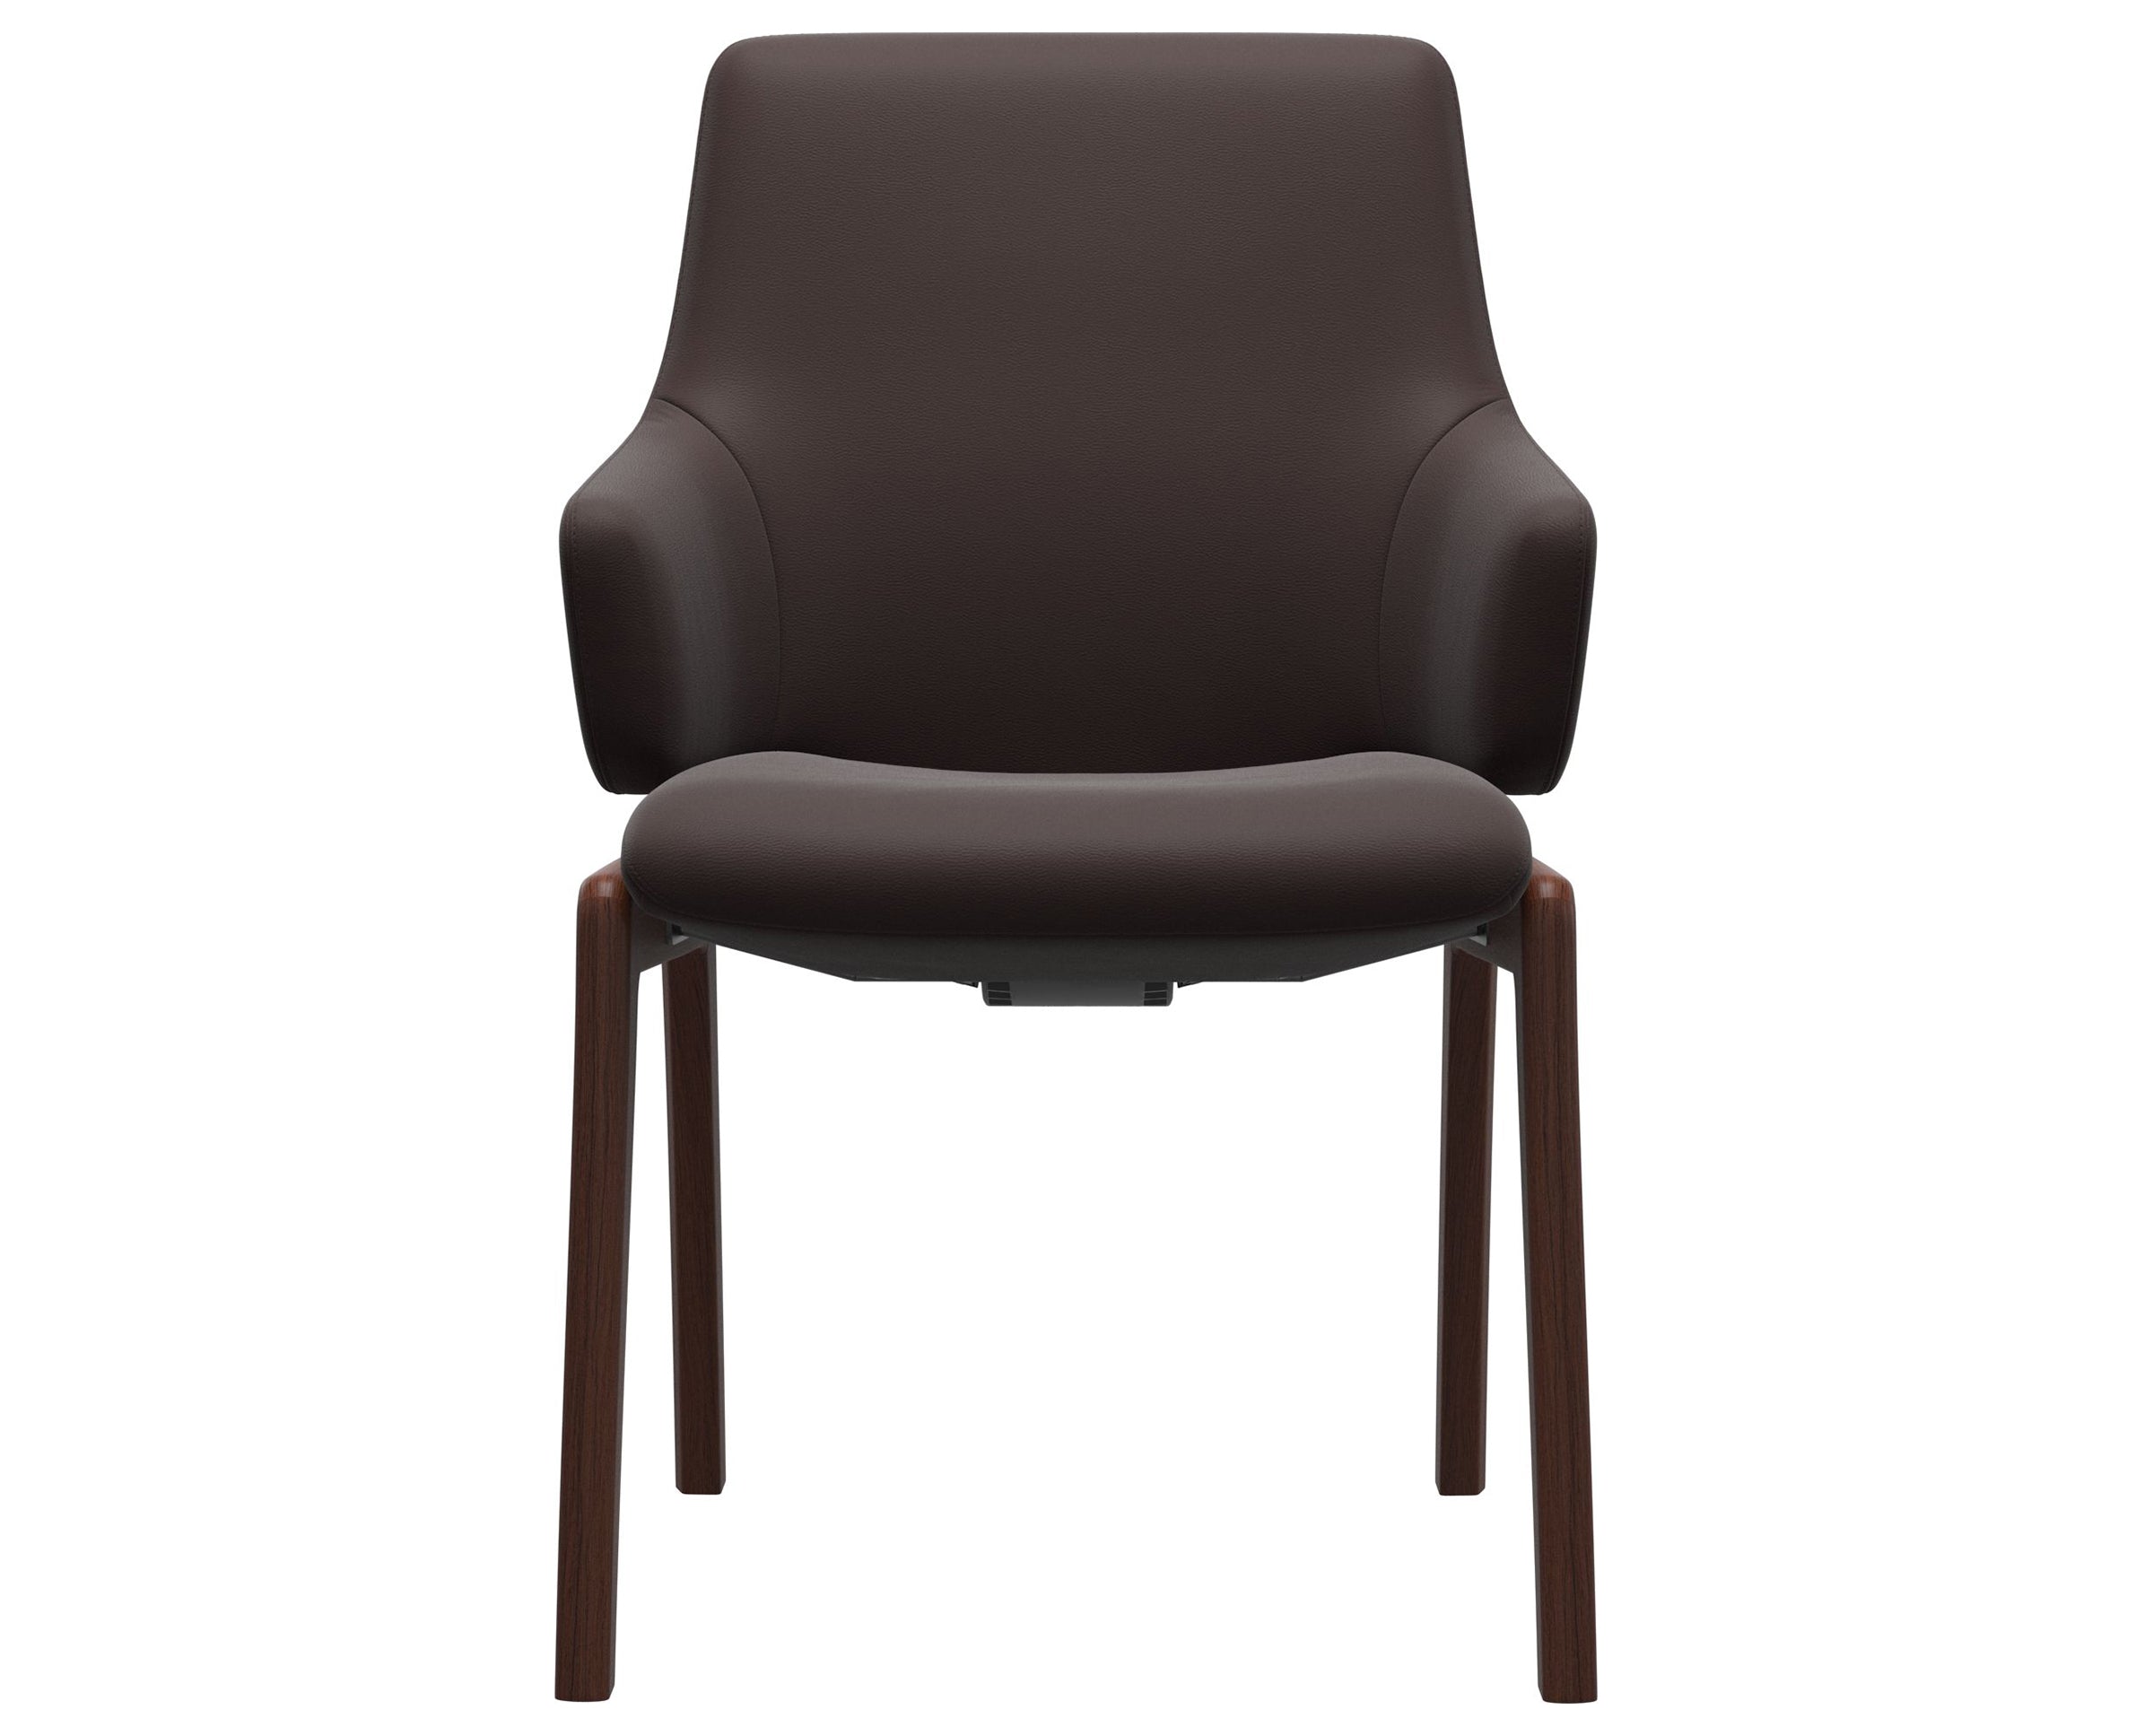 Paloma Leather Chocolate and Walnut Base | Stressless Laurel Low Back D100 Dining Chair w/Arms | Valley Ridge Furniture